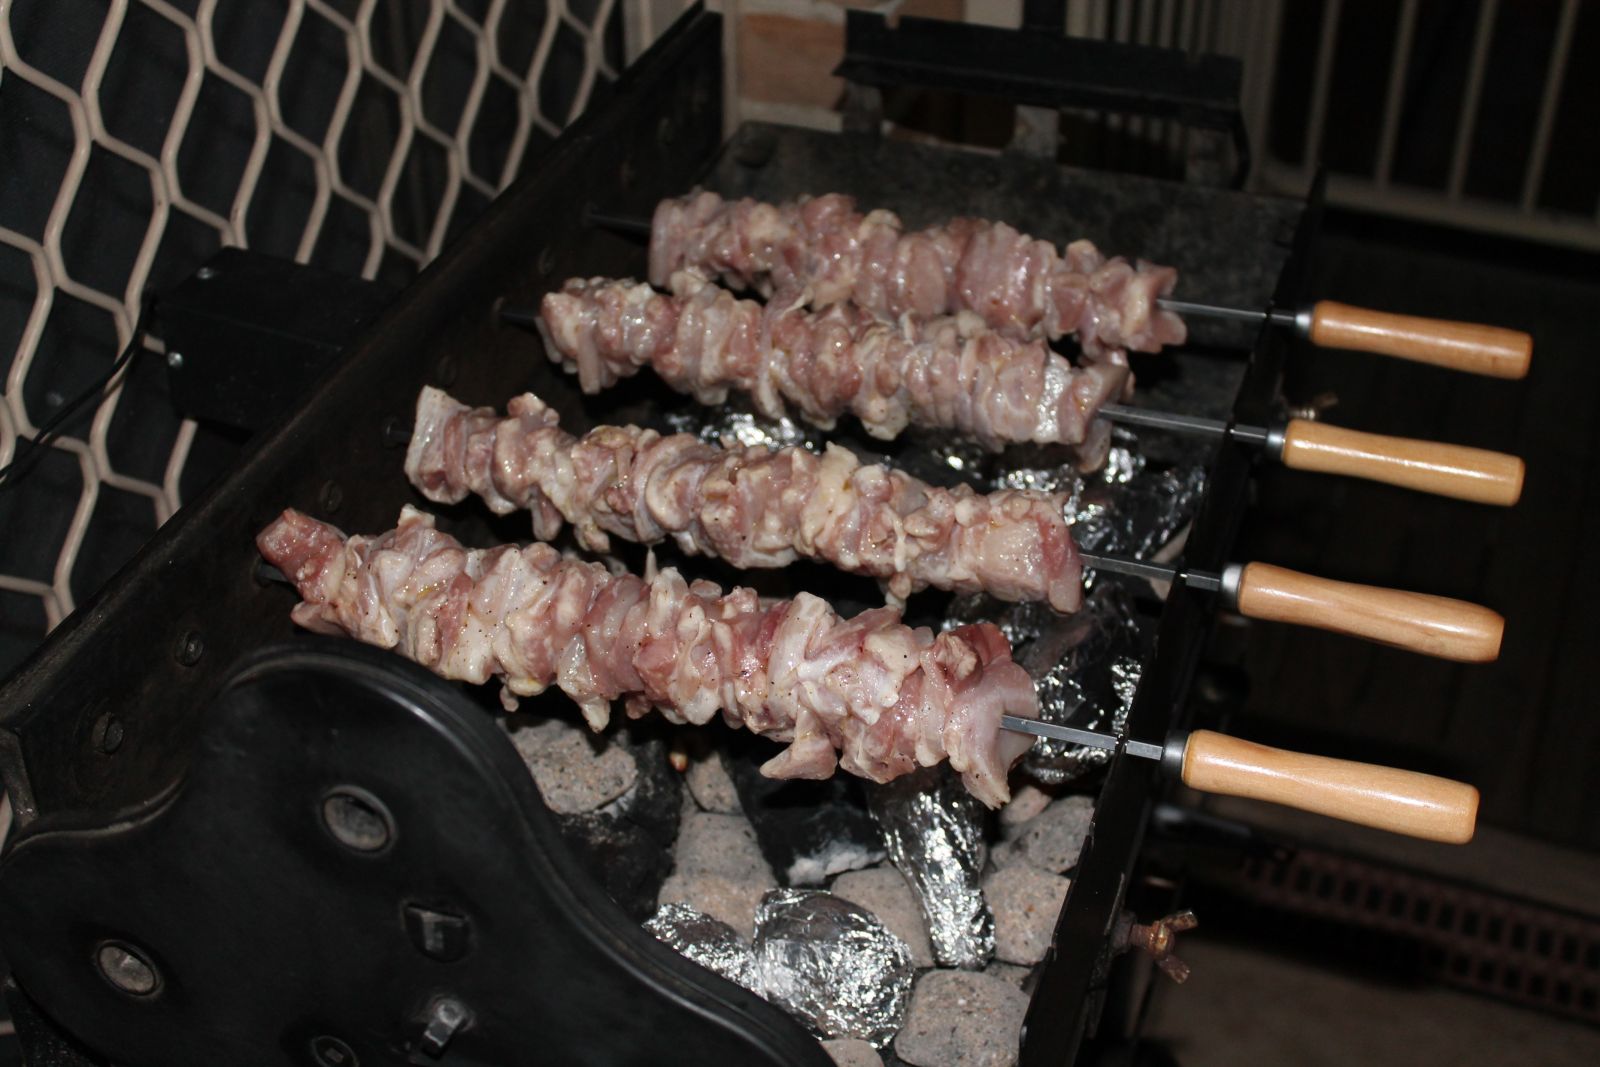 Chicken skewers cooking on a Cyprus Spit Roaster